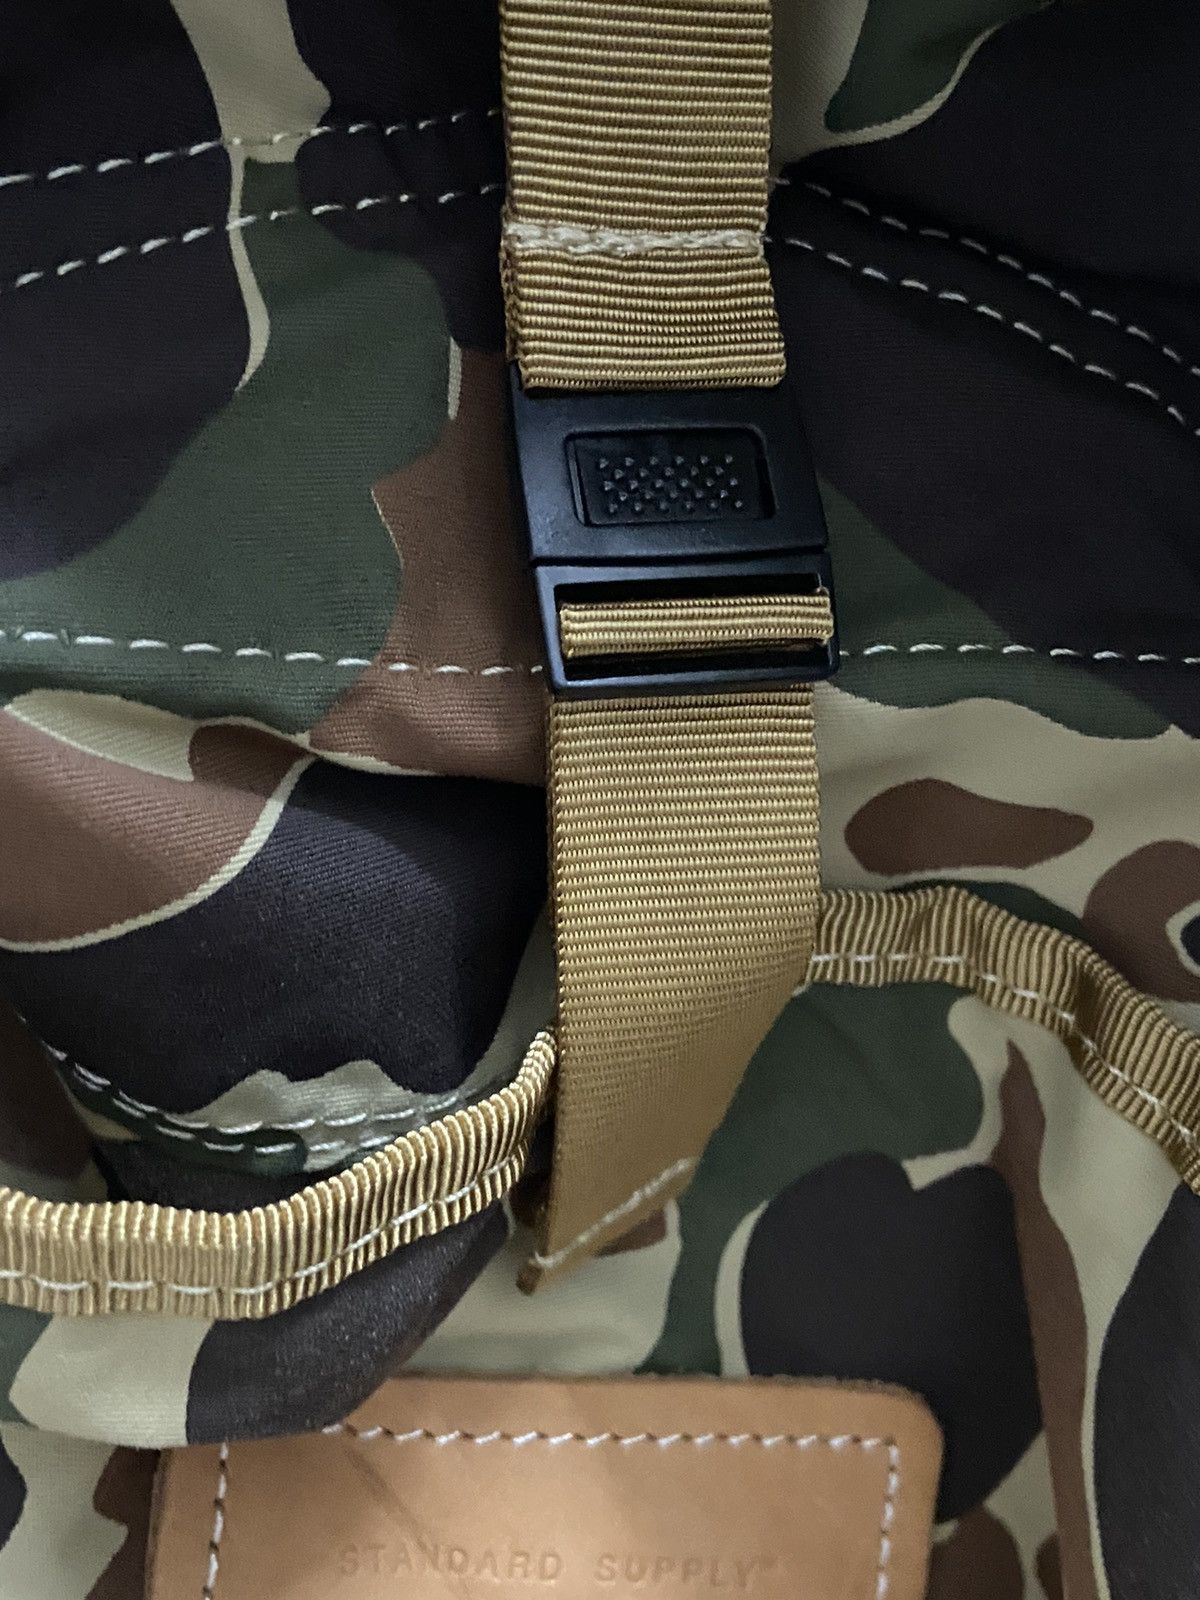 Standard Supply Camo Daily Backpack - 7